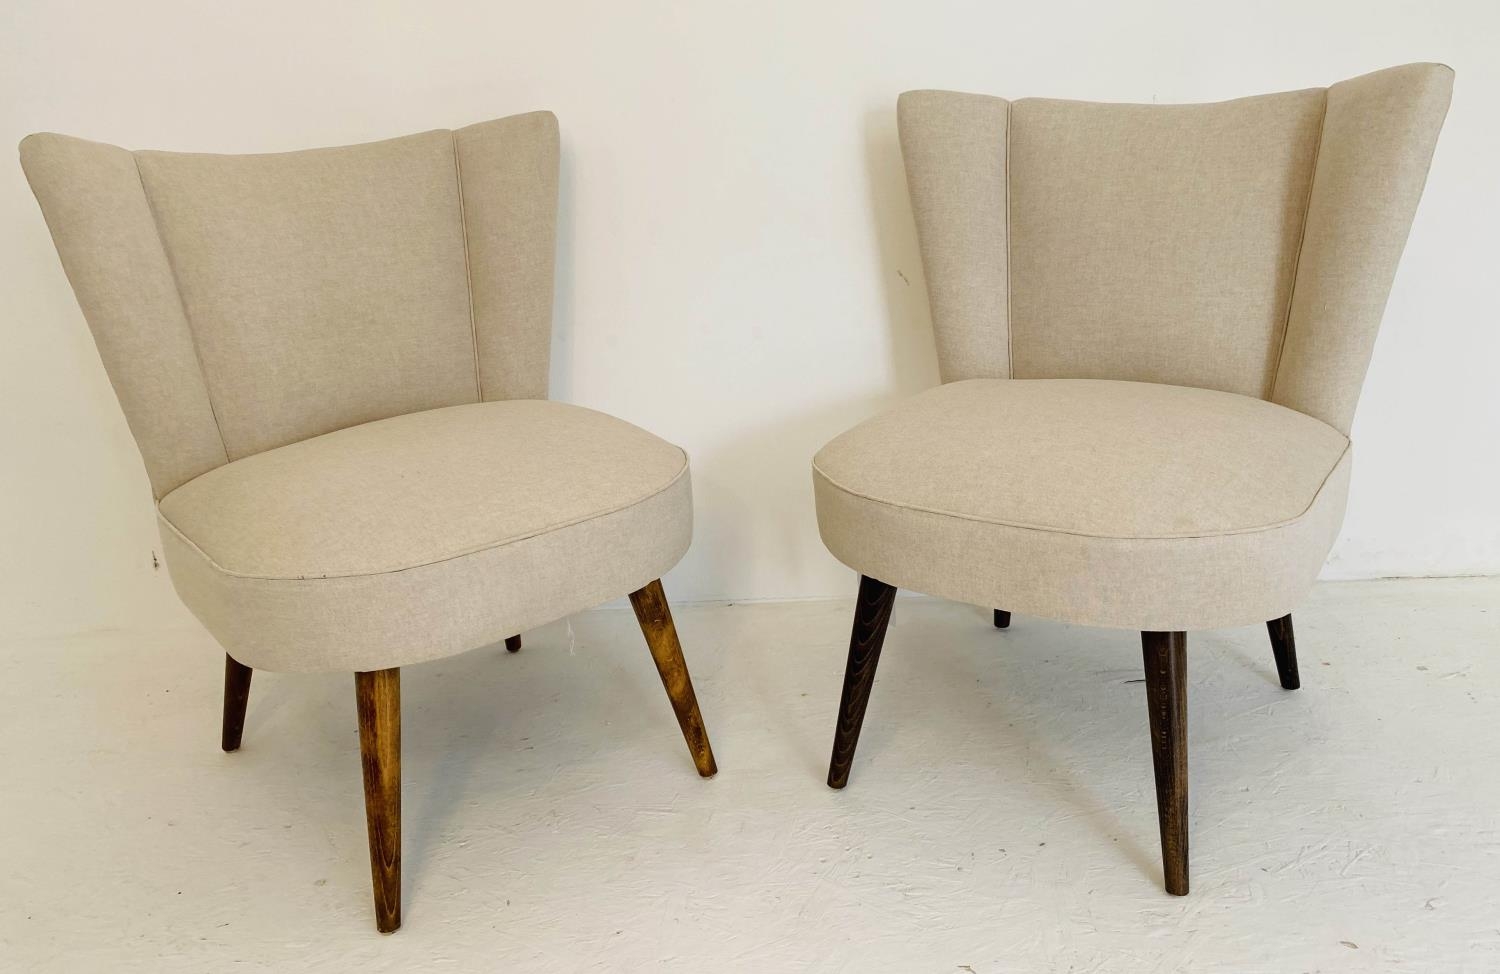 SIDE CHAIRS, a pair, 82cm x 65cm x 68cm, 1960s Danish style, neutral linen upholstery. (2)